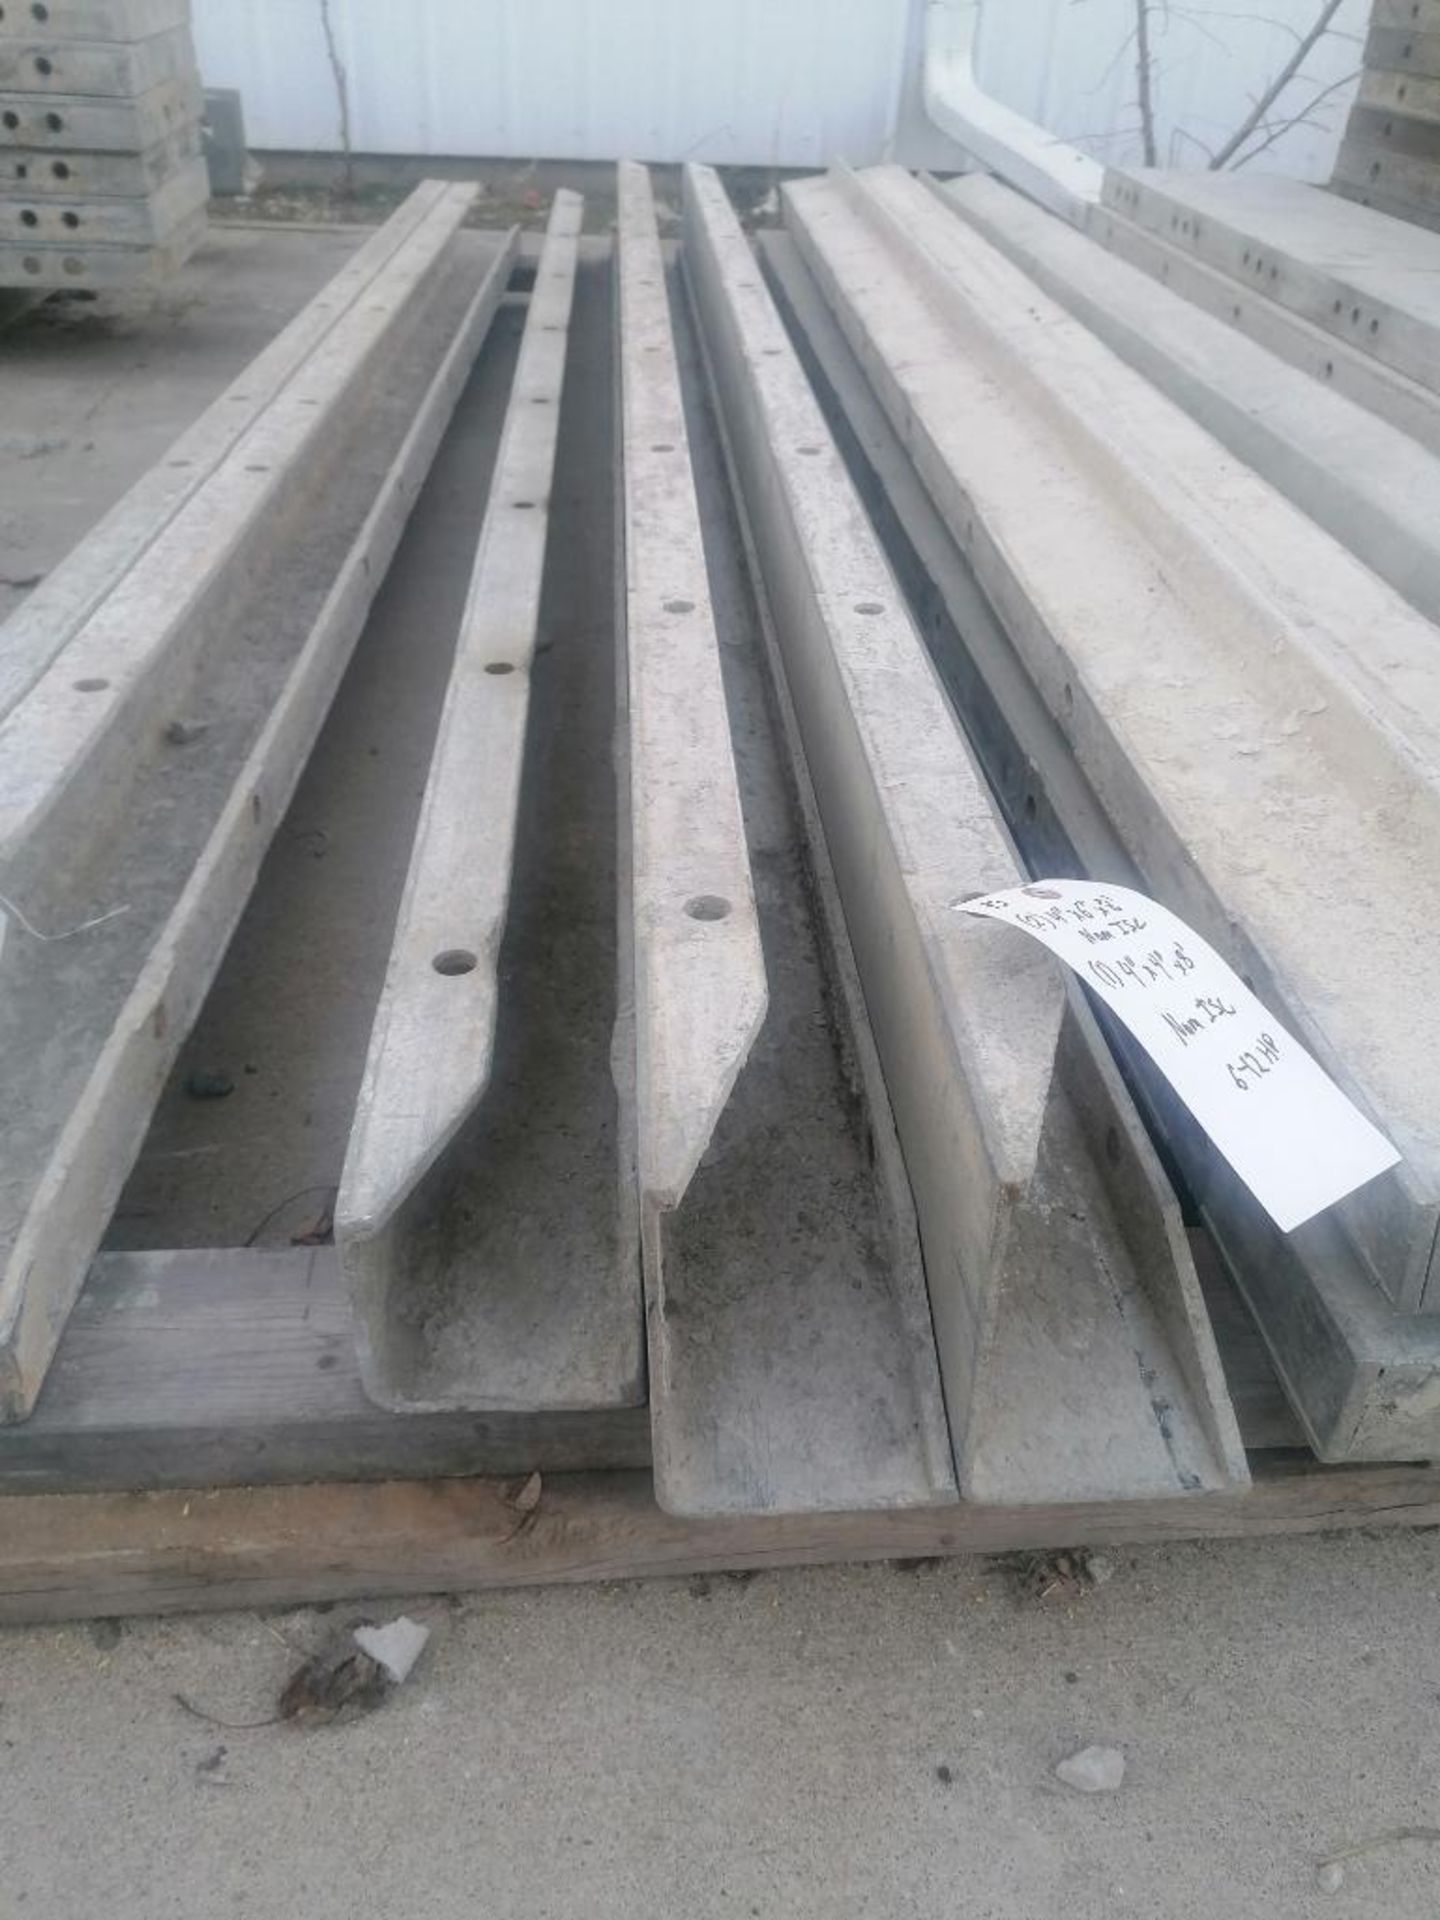 (2) 4" x 6" x 8' & (1) 4" x 4" x 8' Nominal ISC Wall-Ties Smooth Aluminum Concrete Forms 6-12 Hole